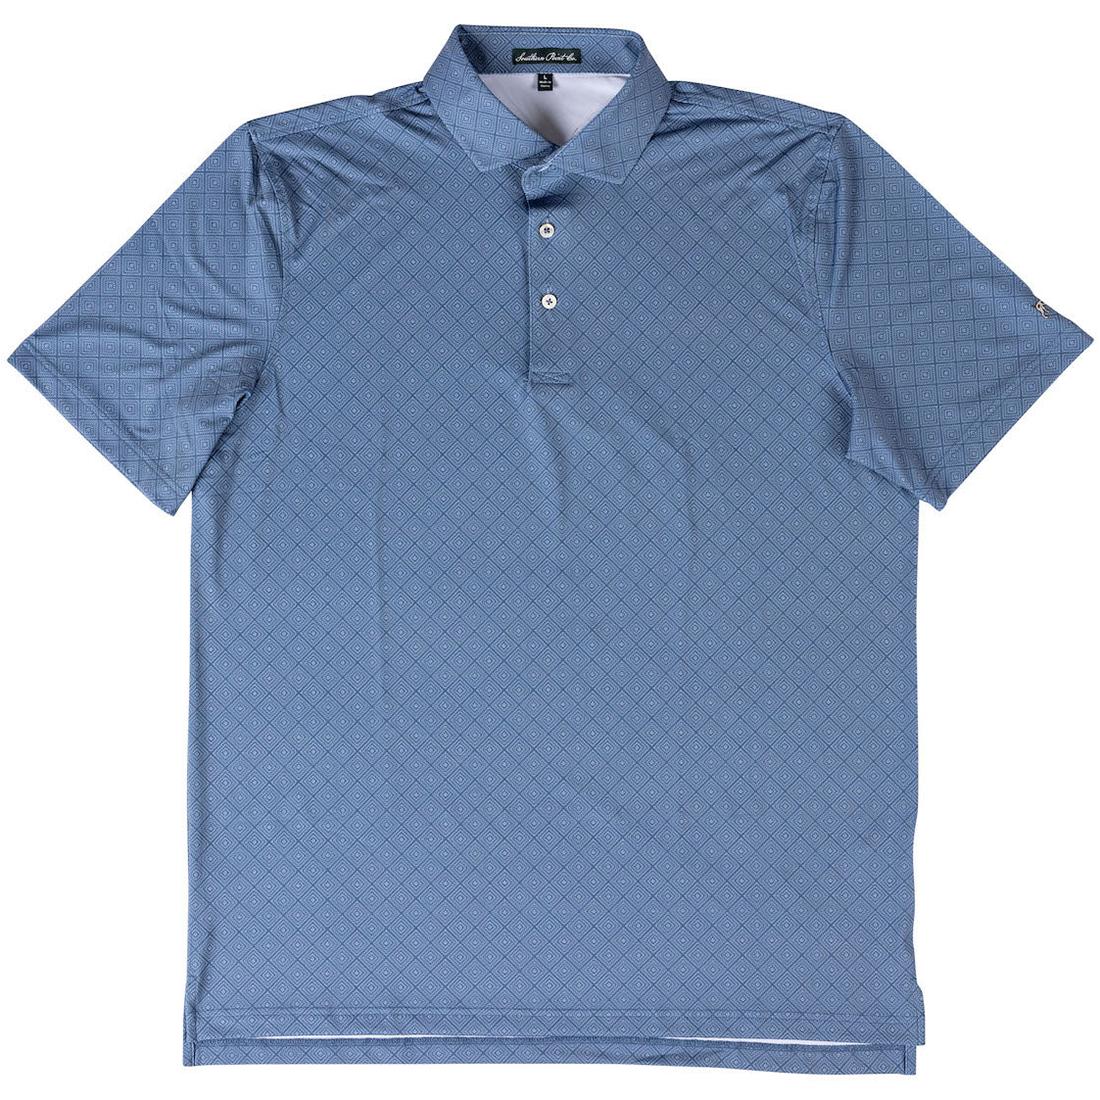  Youth Patio Perf Polo Blue/White